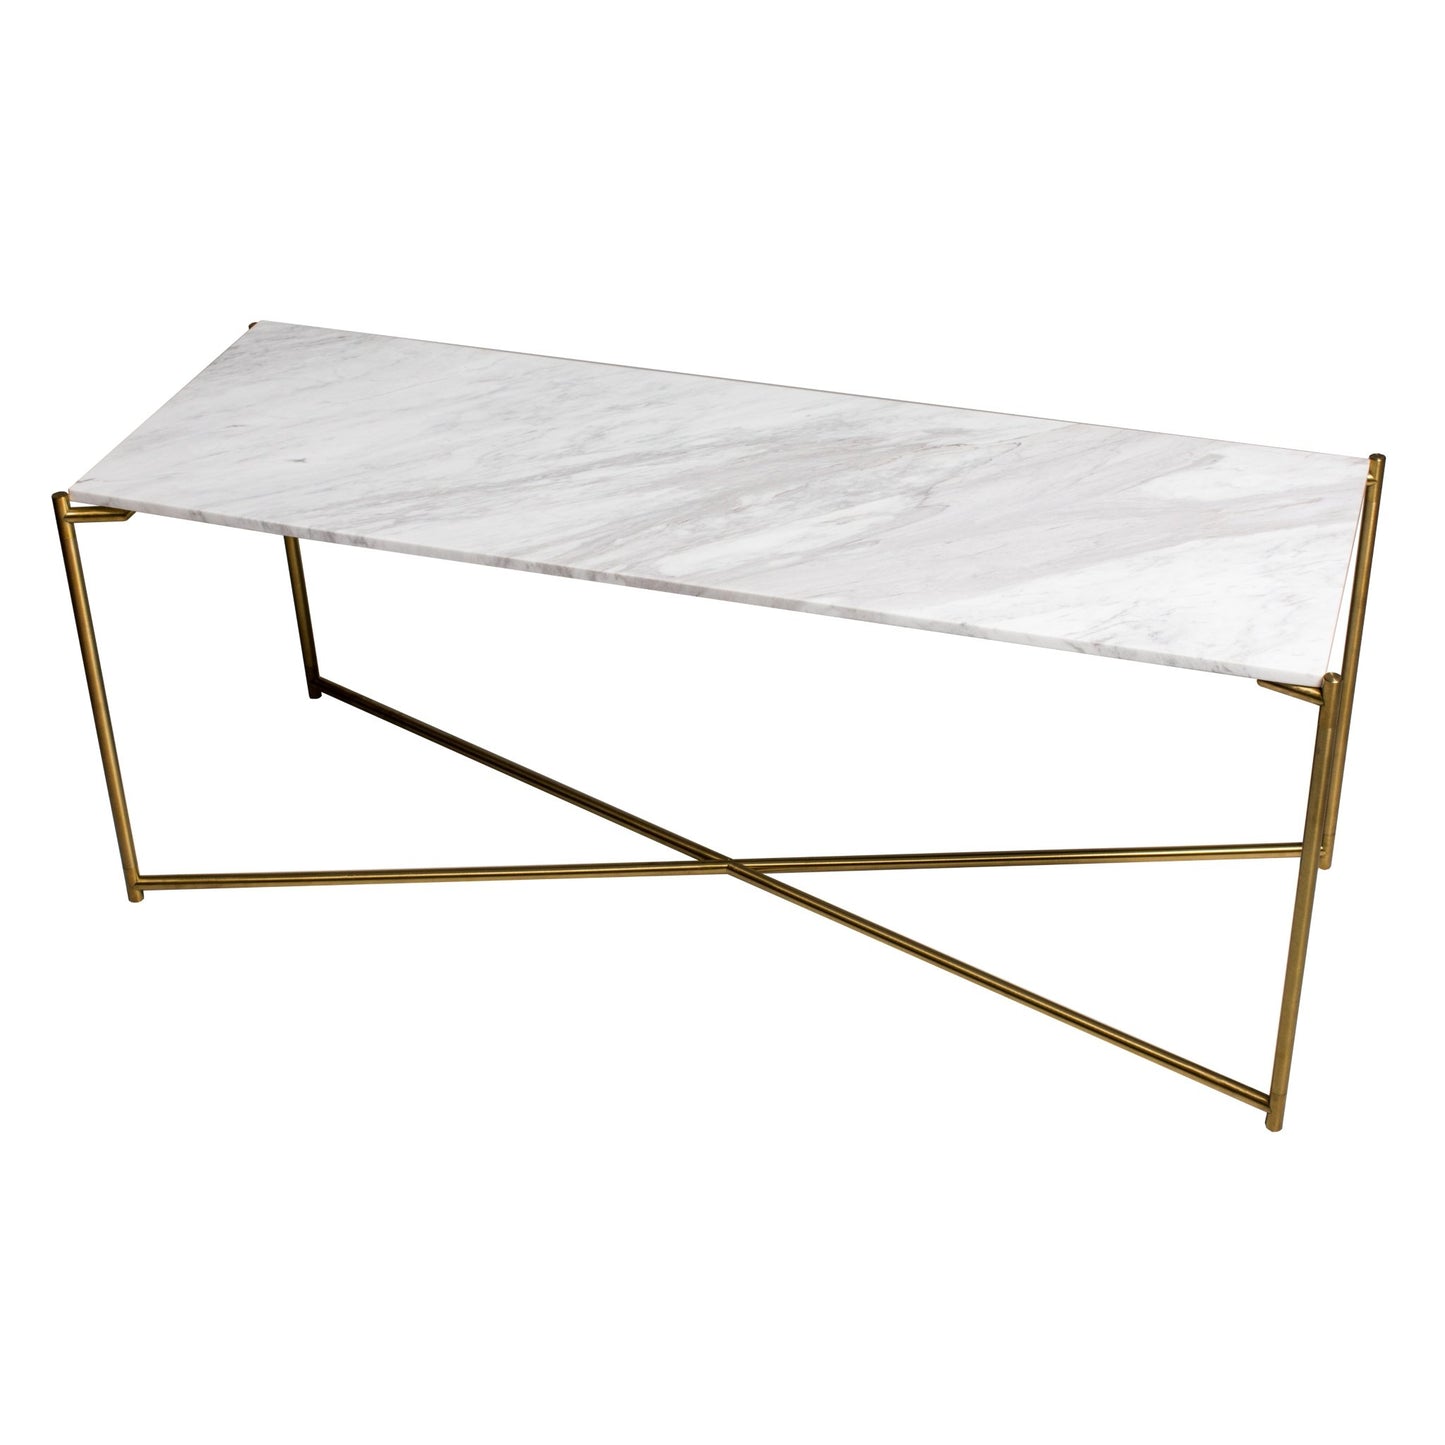 Iris Large TV Stand - White Marble & Brass Frame